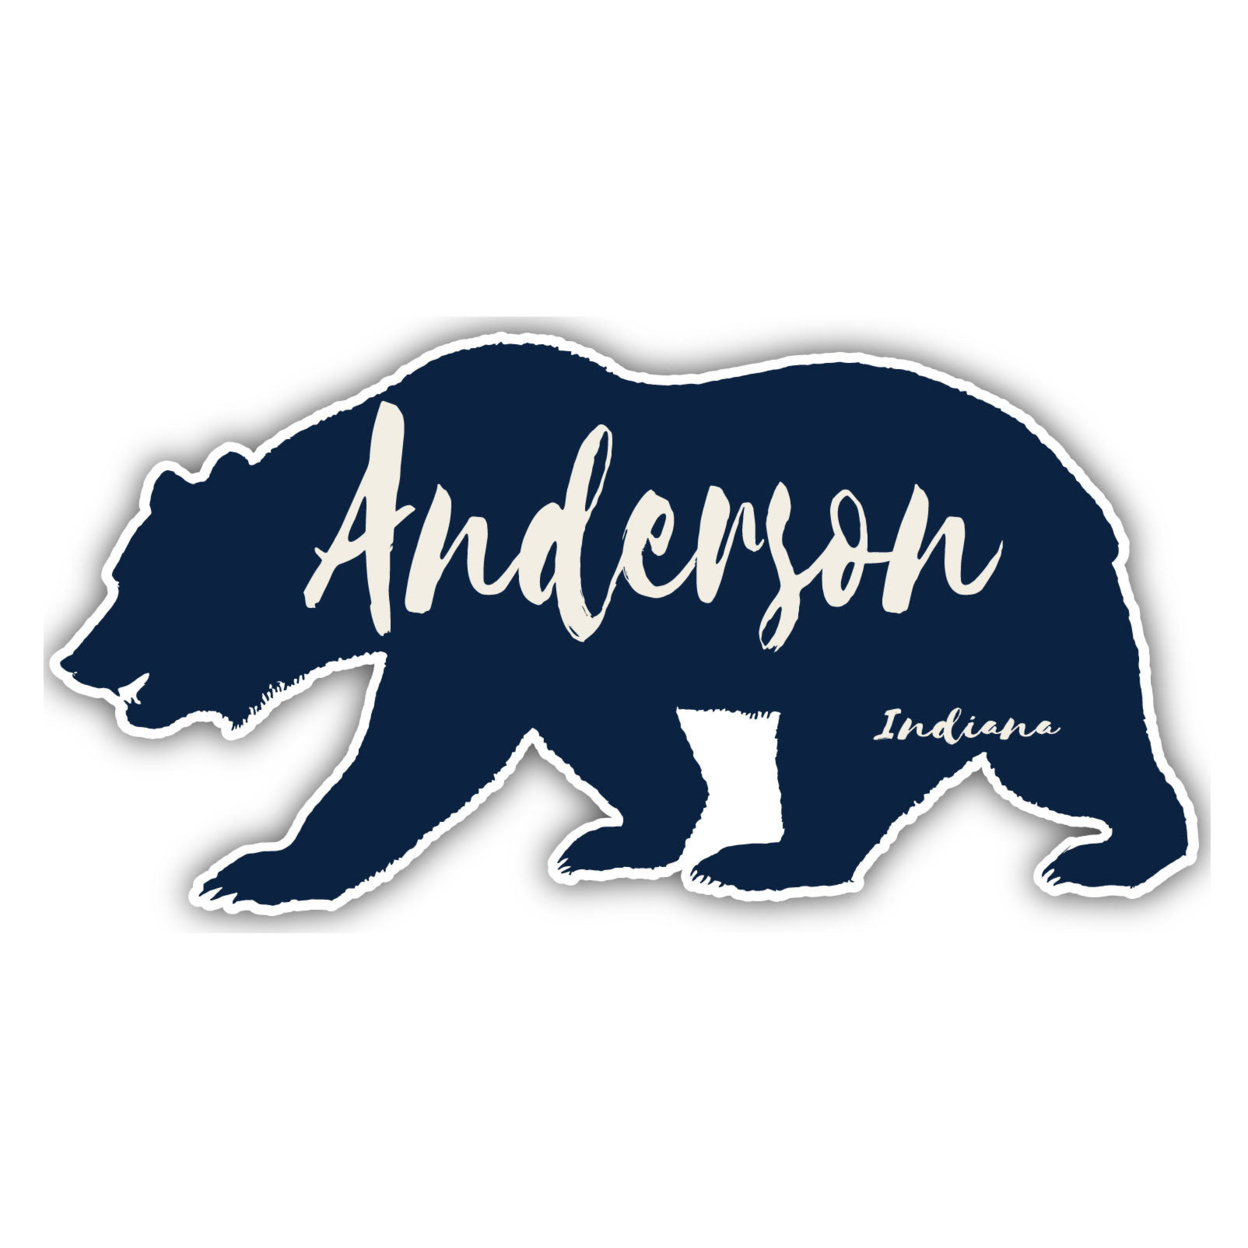 Anderson Indiana Souvenir Decorative Stickers (Choose Theme And Size) - Single Unit, 6-Inch, Bear